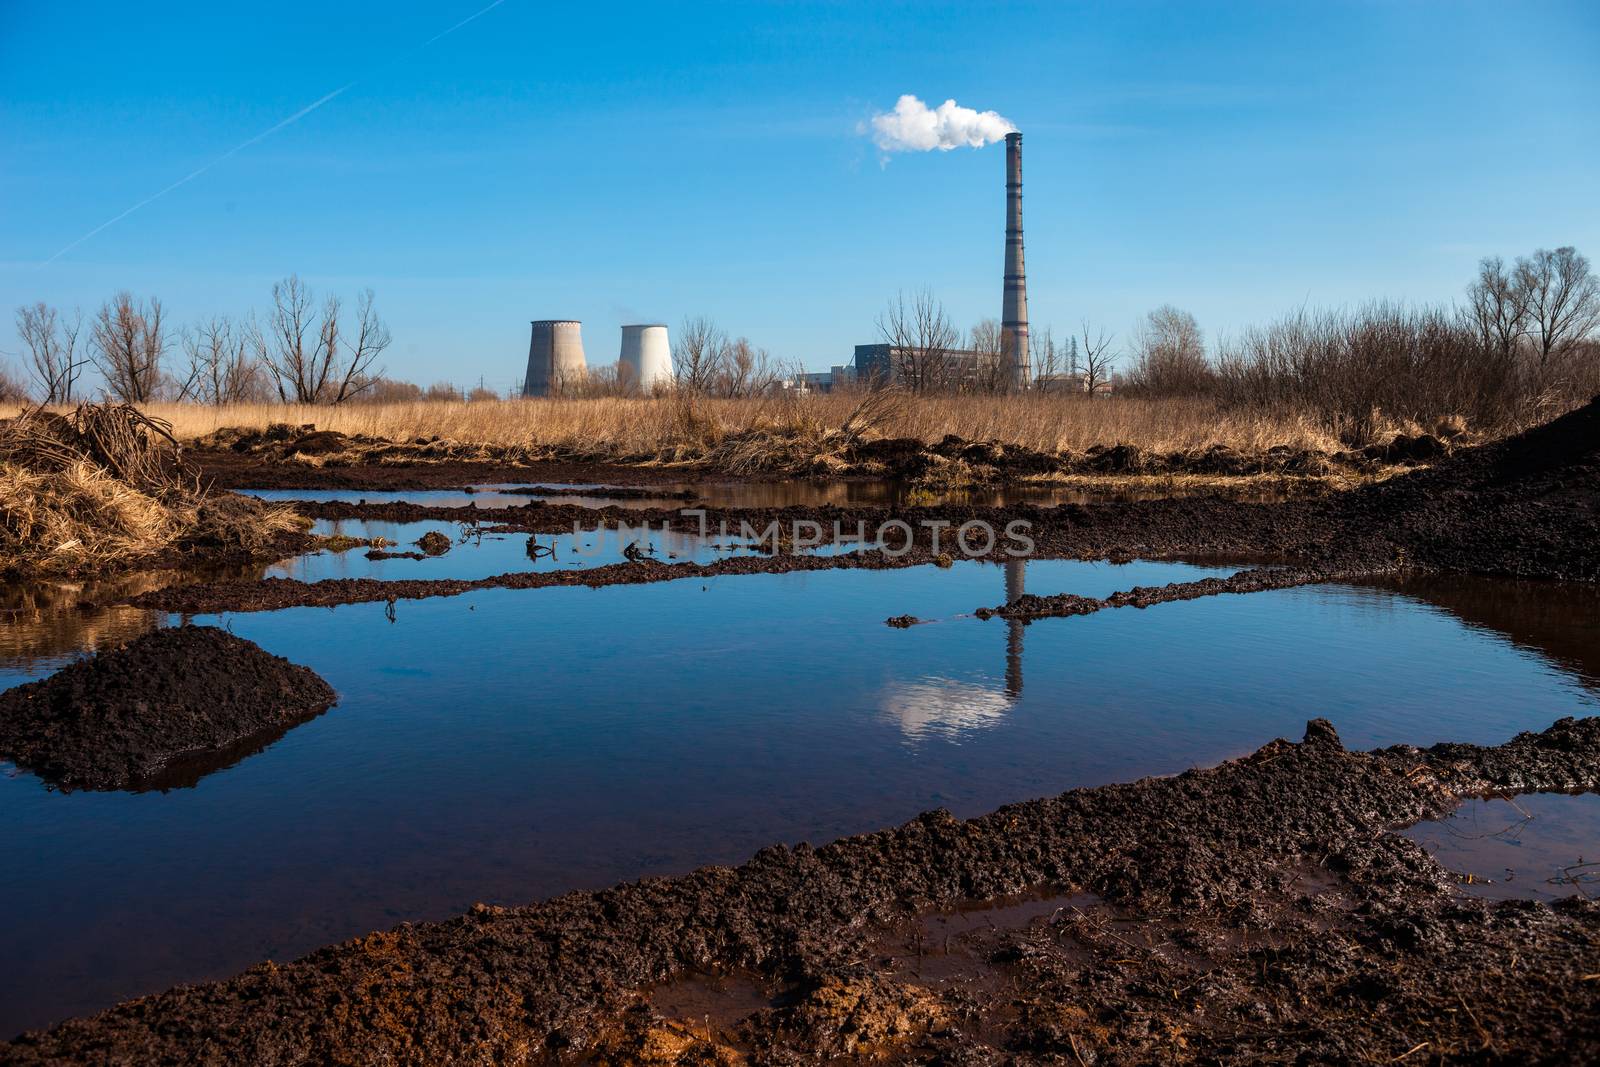 Cogeneration plant (combined heat and power station) in Kyiv, Ukraine. Industrial landscape.